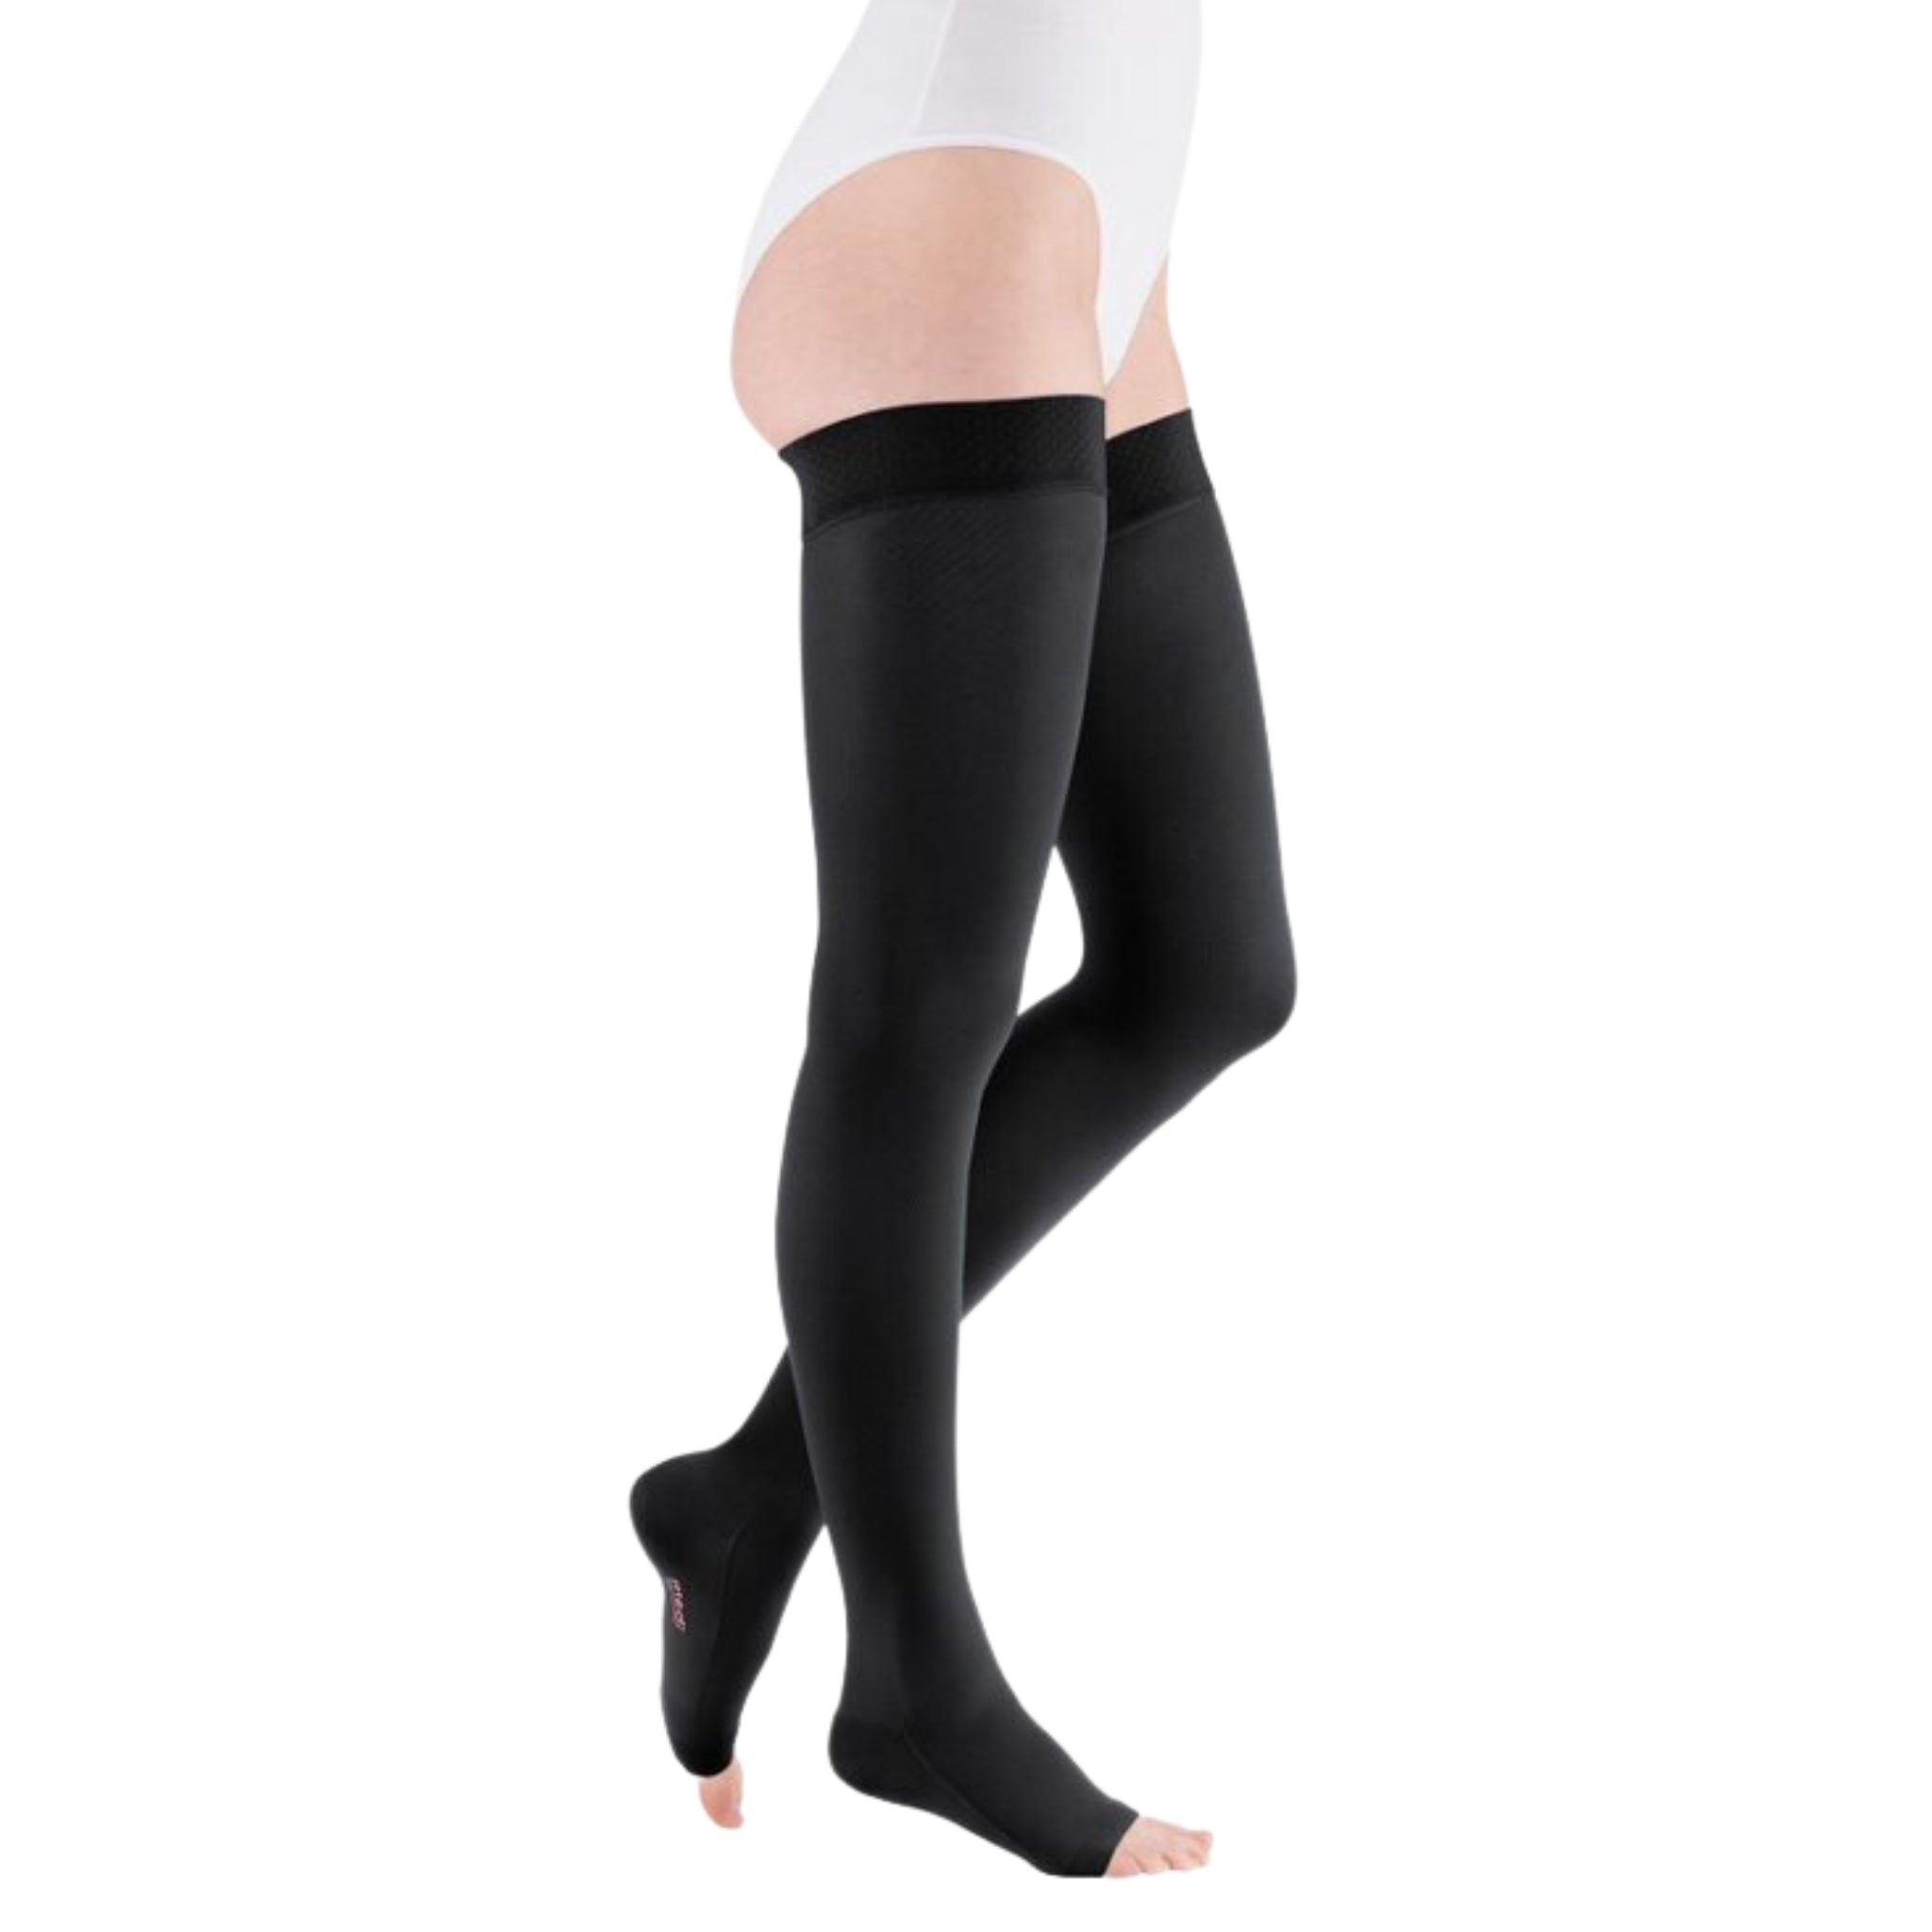 mediven®️ comfort Thigh High Compression Stockings + Silicone Topband Black